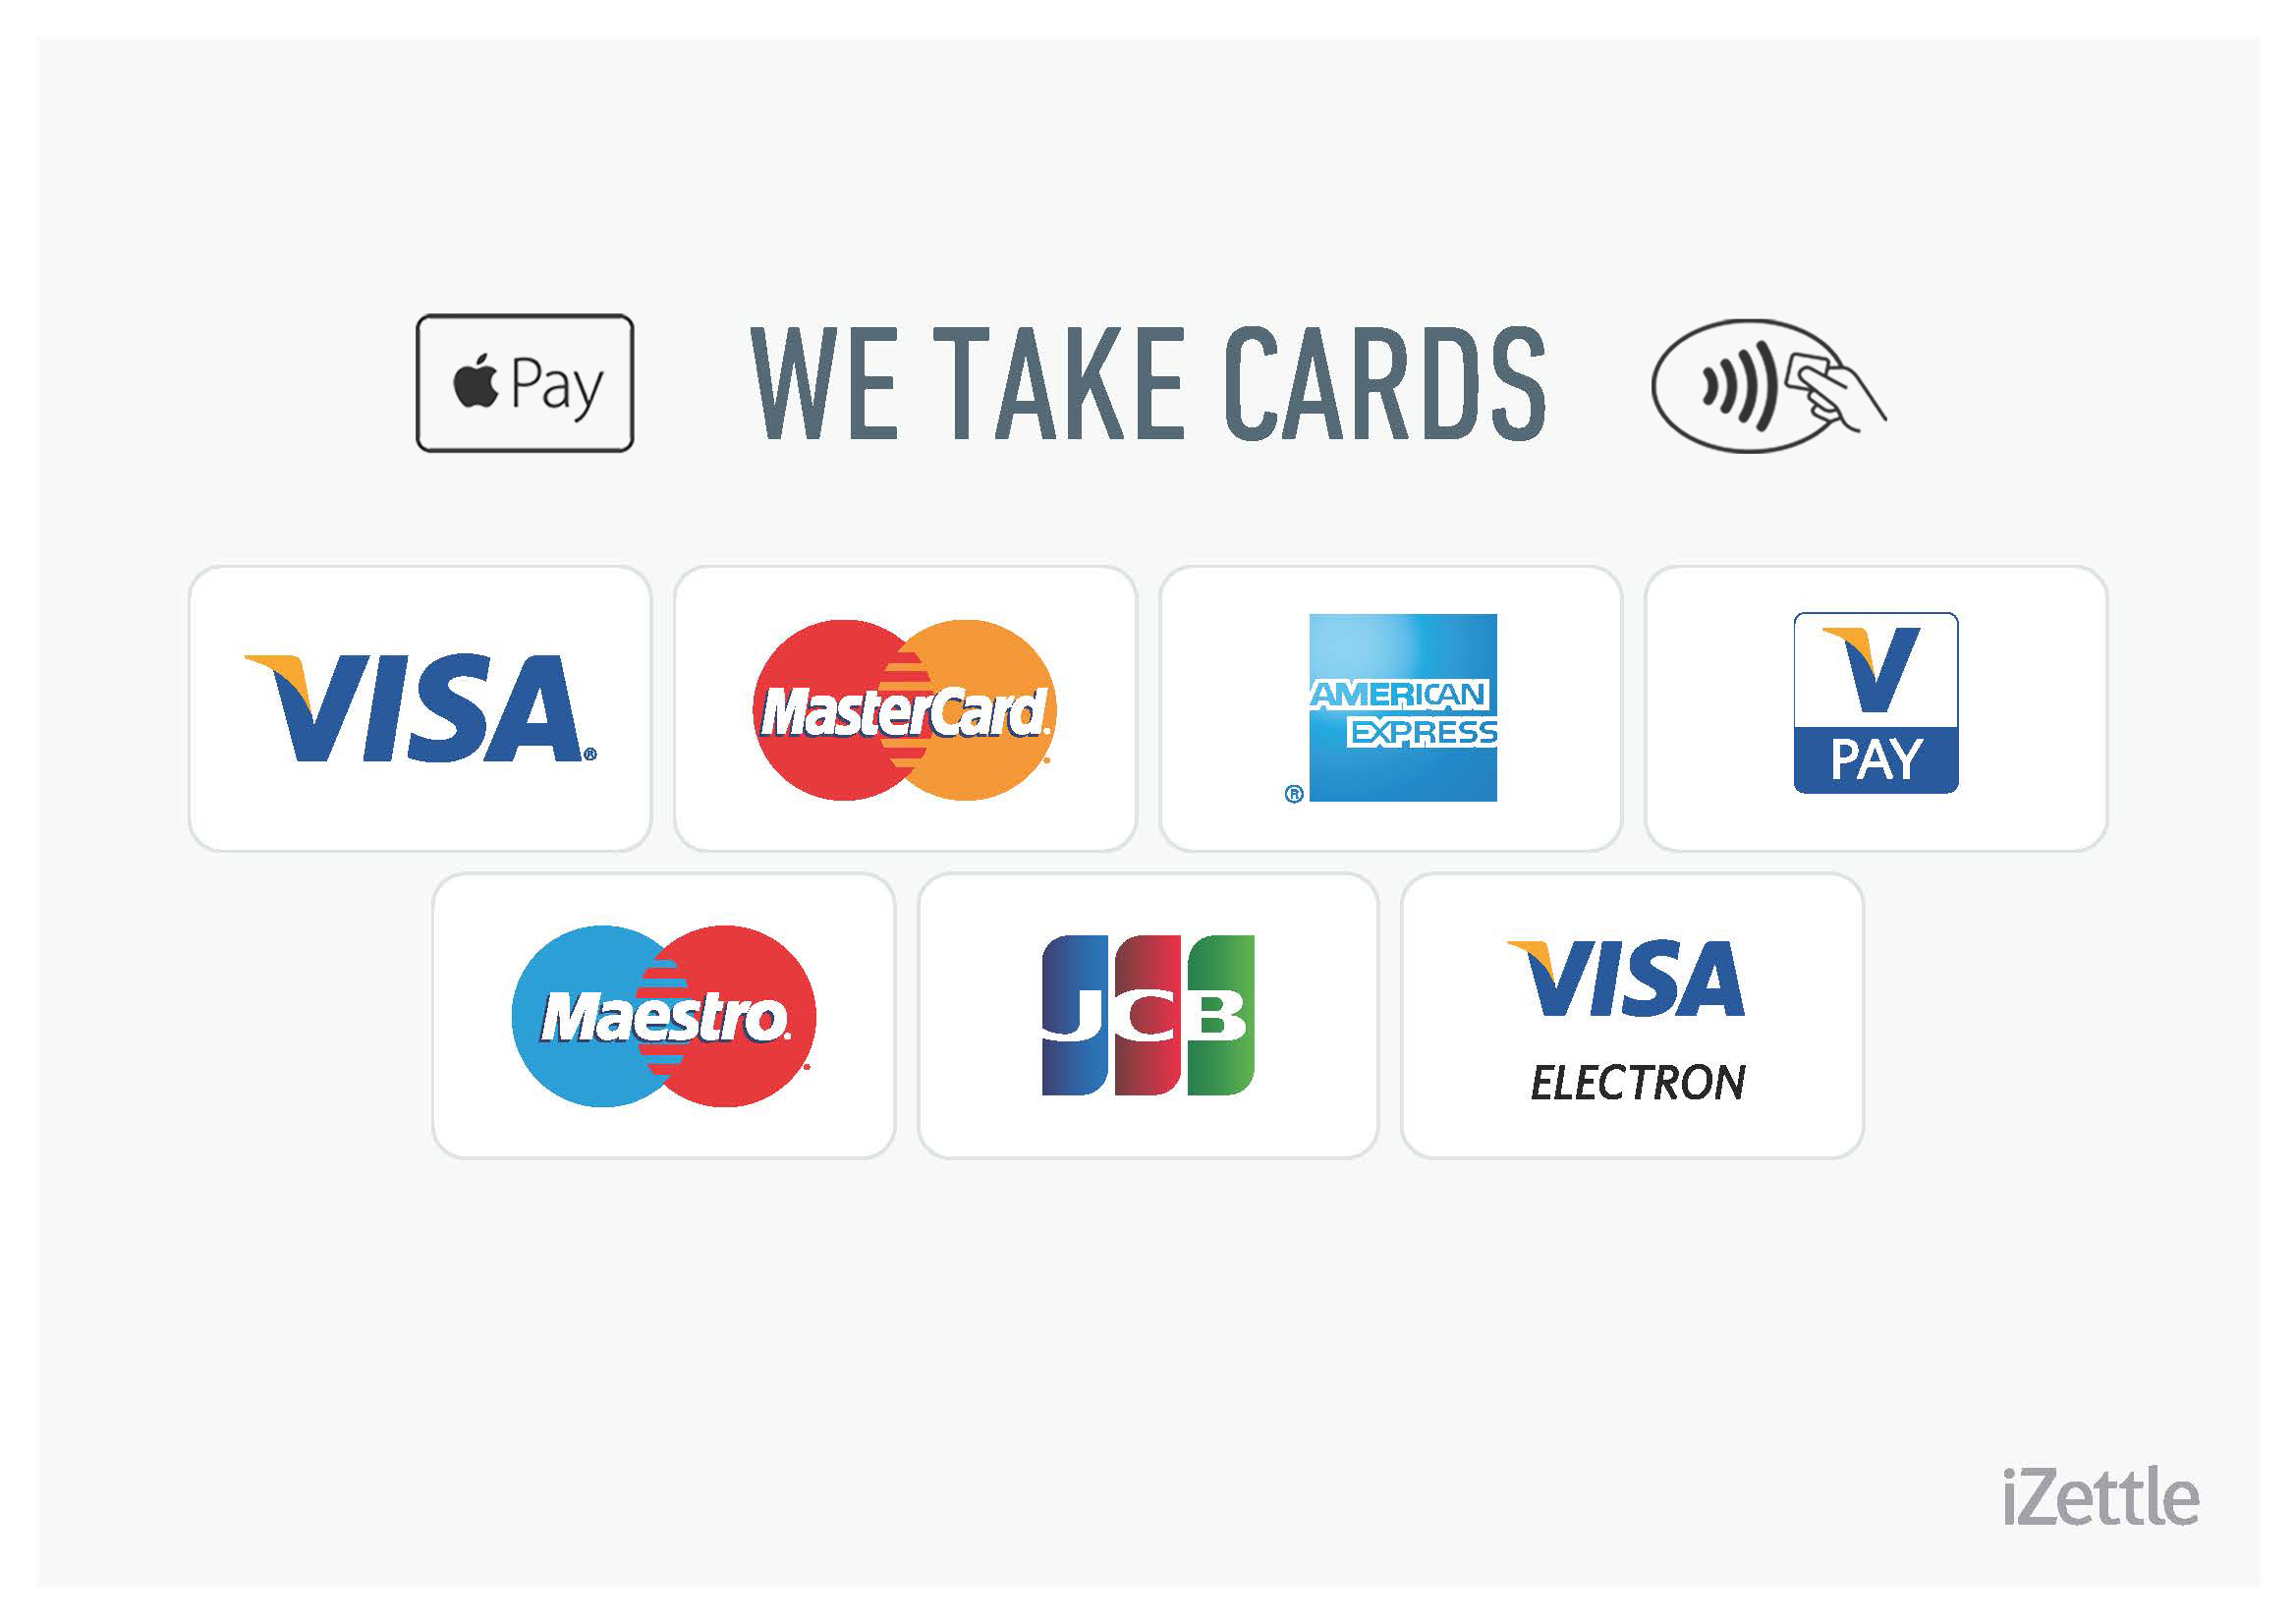 Accepted payments. Pay карточка. Payment Card. CARDPAY. Payment by Card.